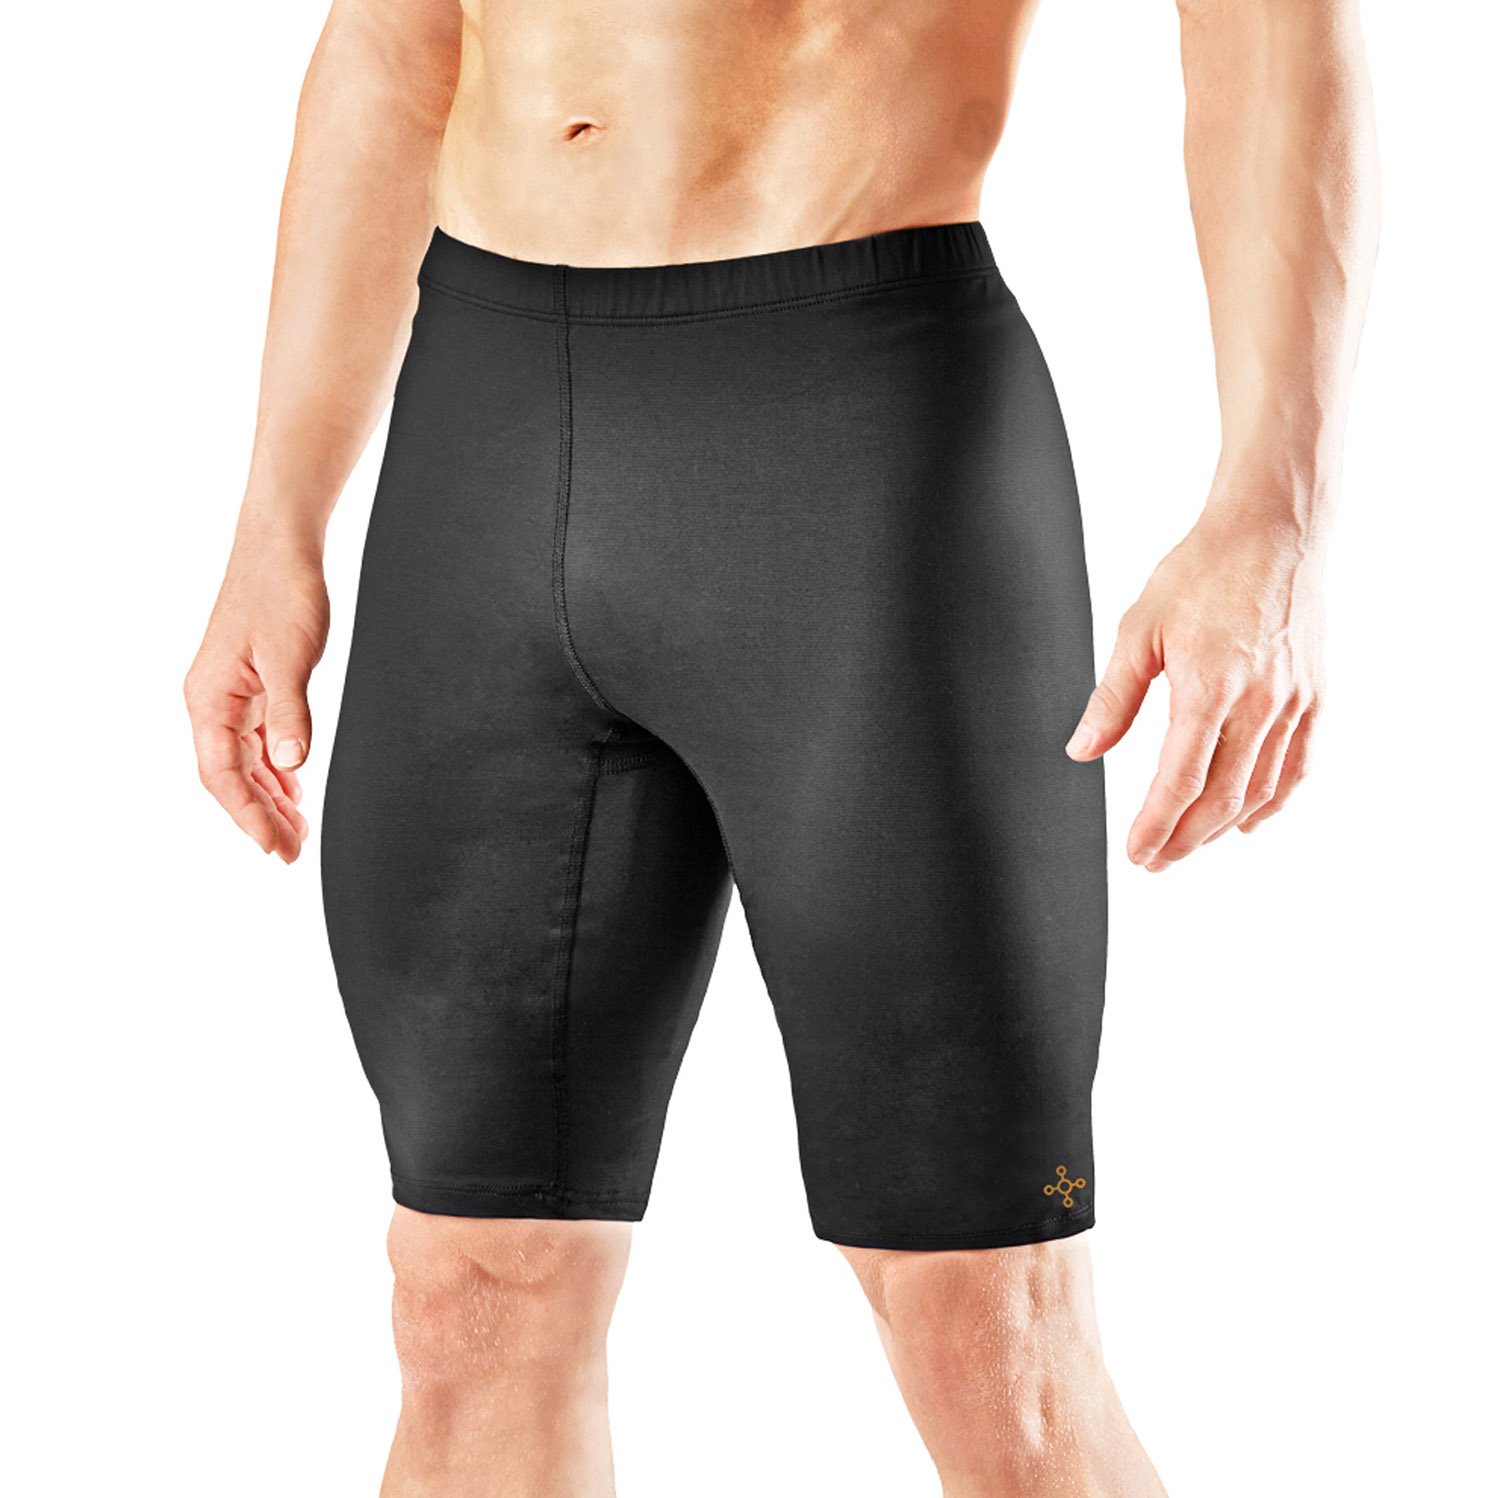 Download Tommie Copper Men's Compression Running Shorts